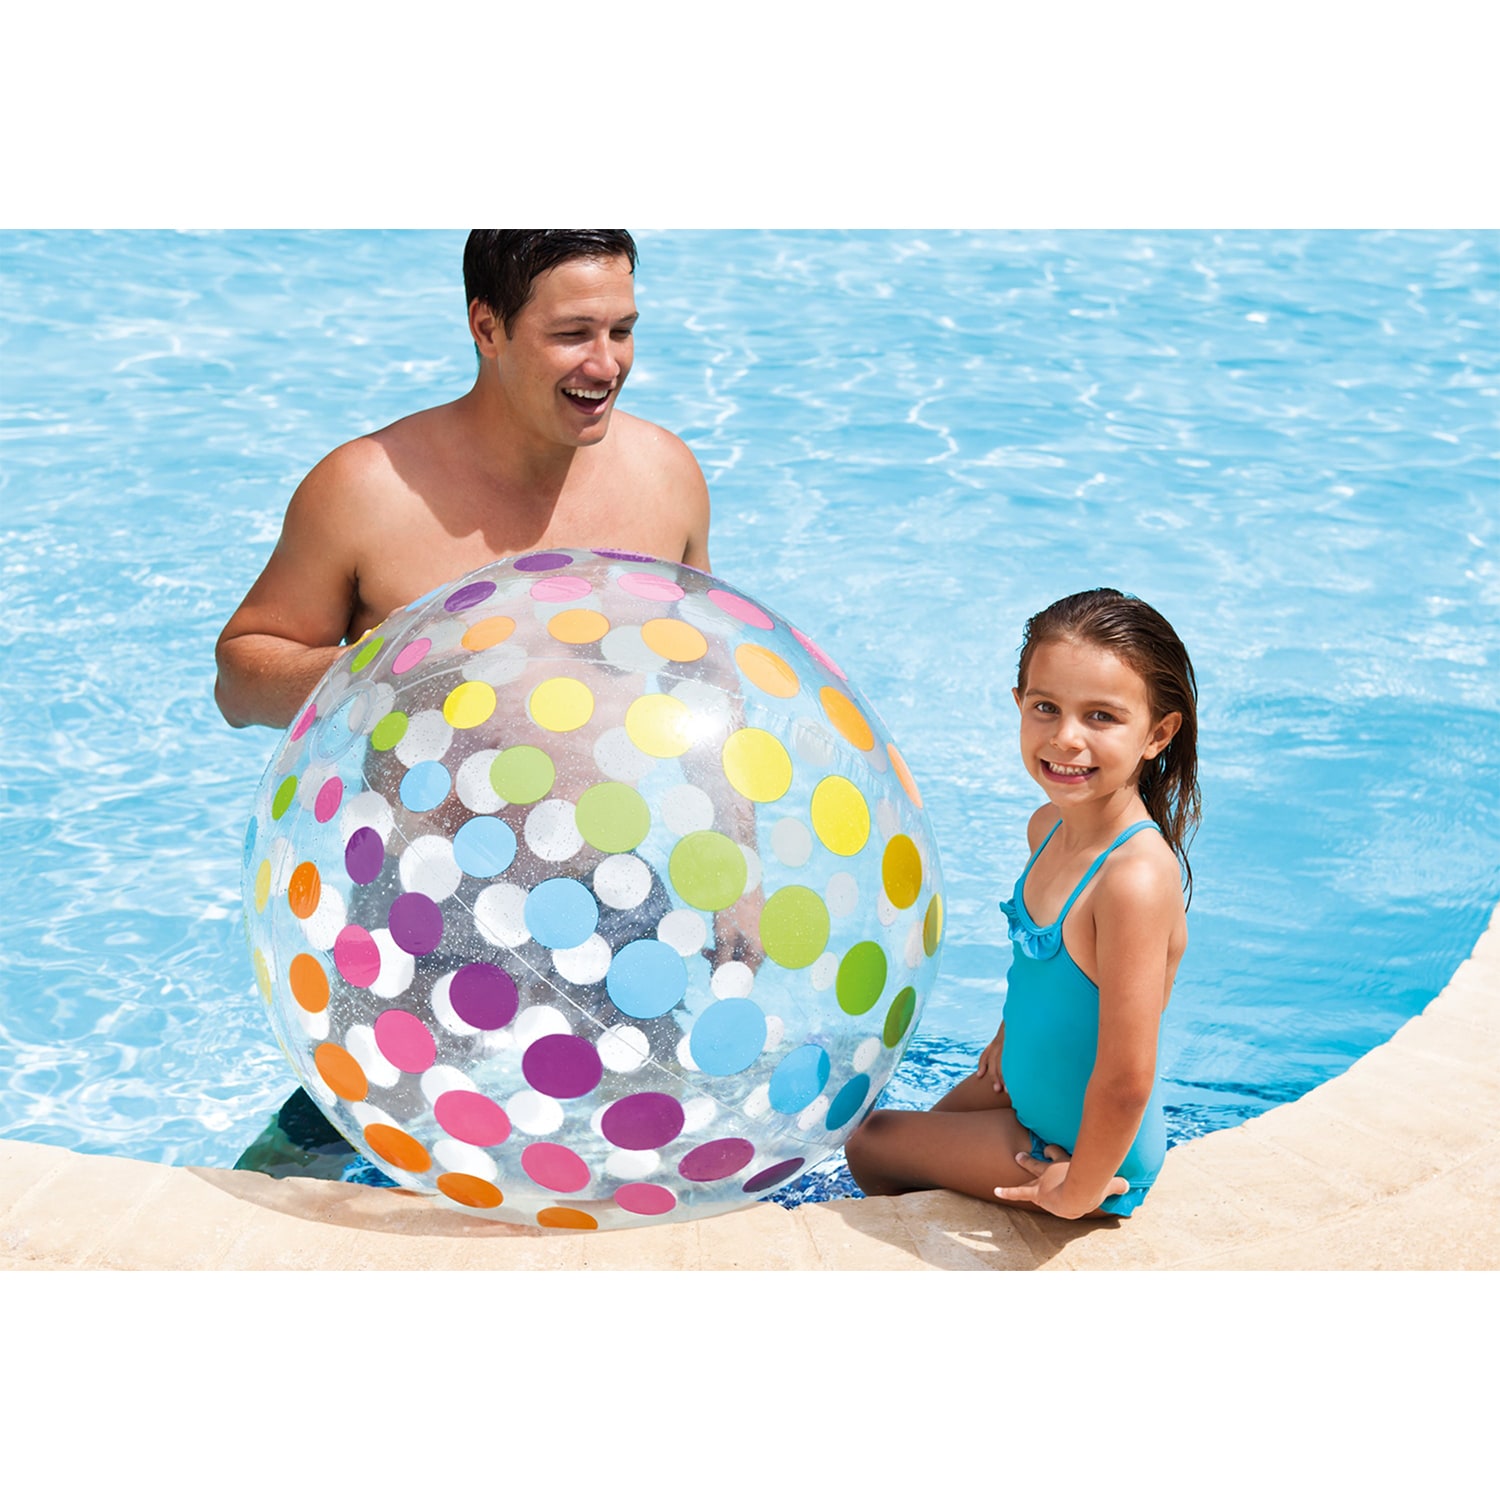 Inflatable Water Volleyball Court for Aqua Game in Sea or Swimming Pool,Air  Pump Included